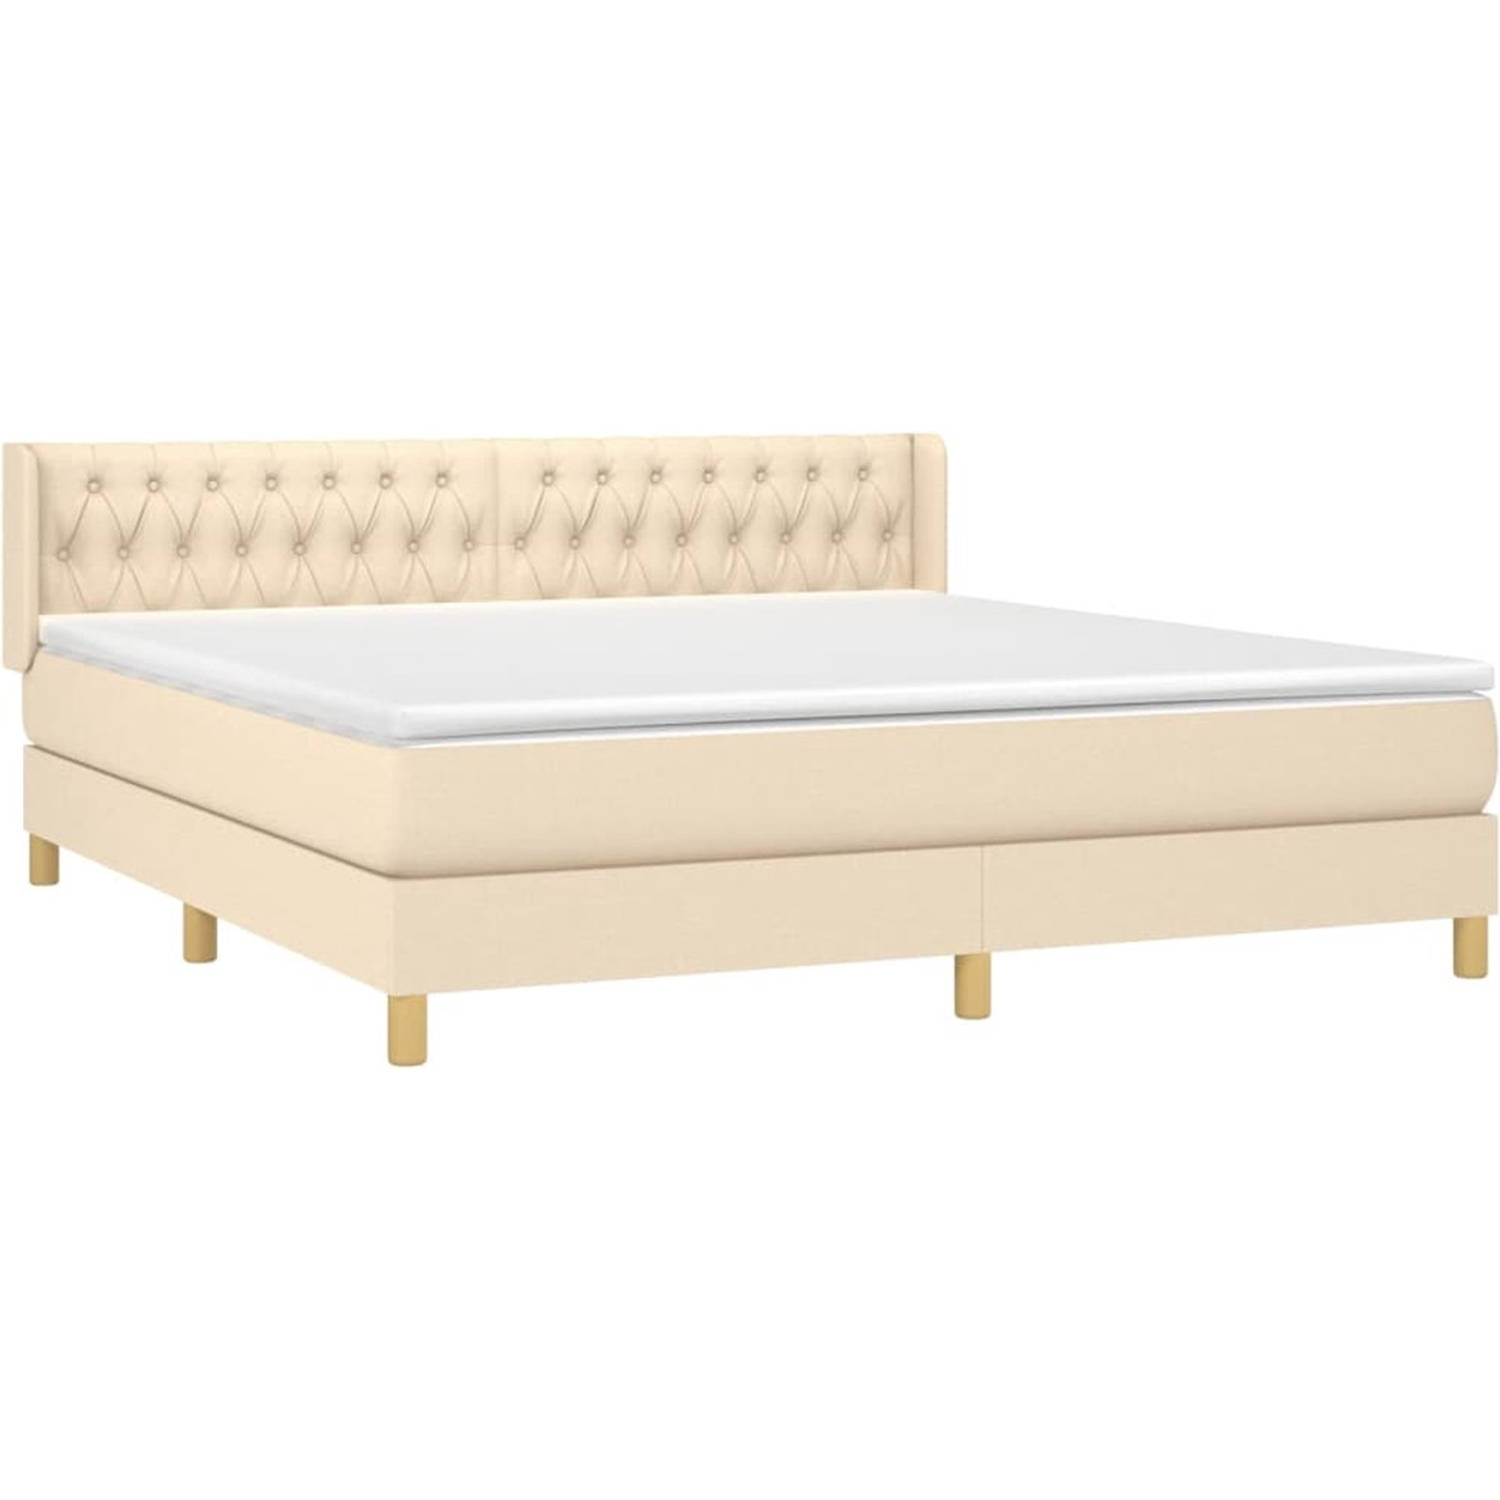 The Living Store Boxspringbed - Rustgevend - Bed - 180x200x78/88 - Ken- Duurzaam materiaal